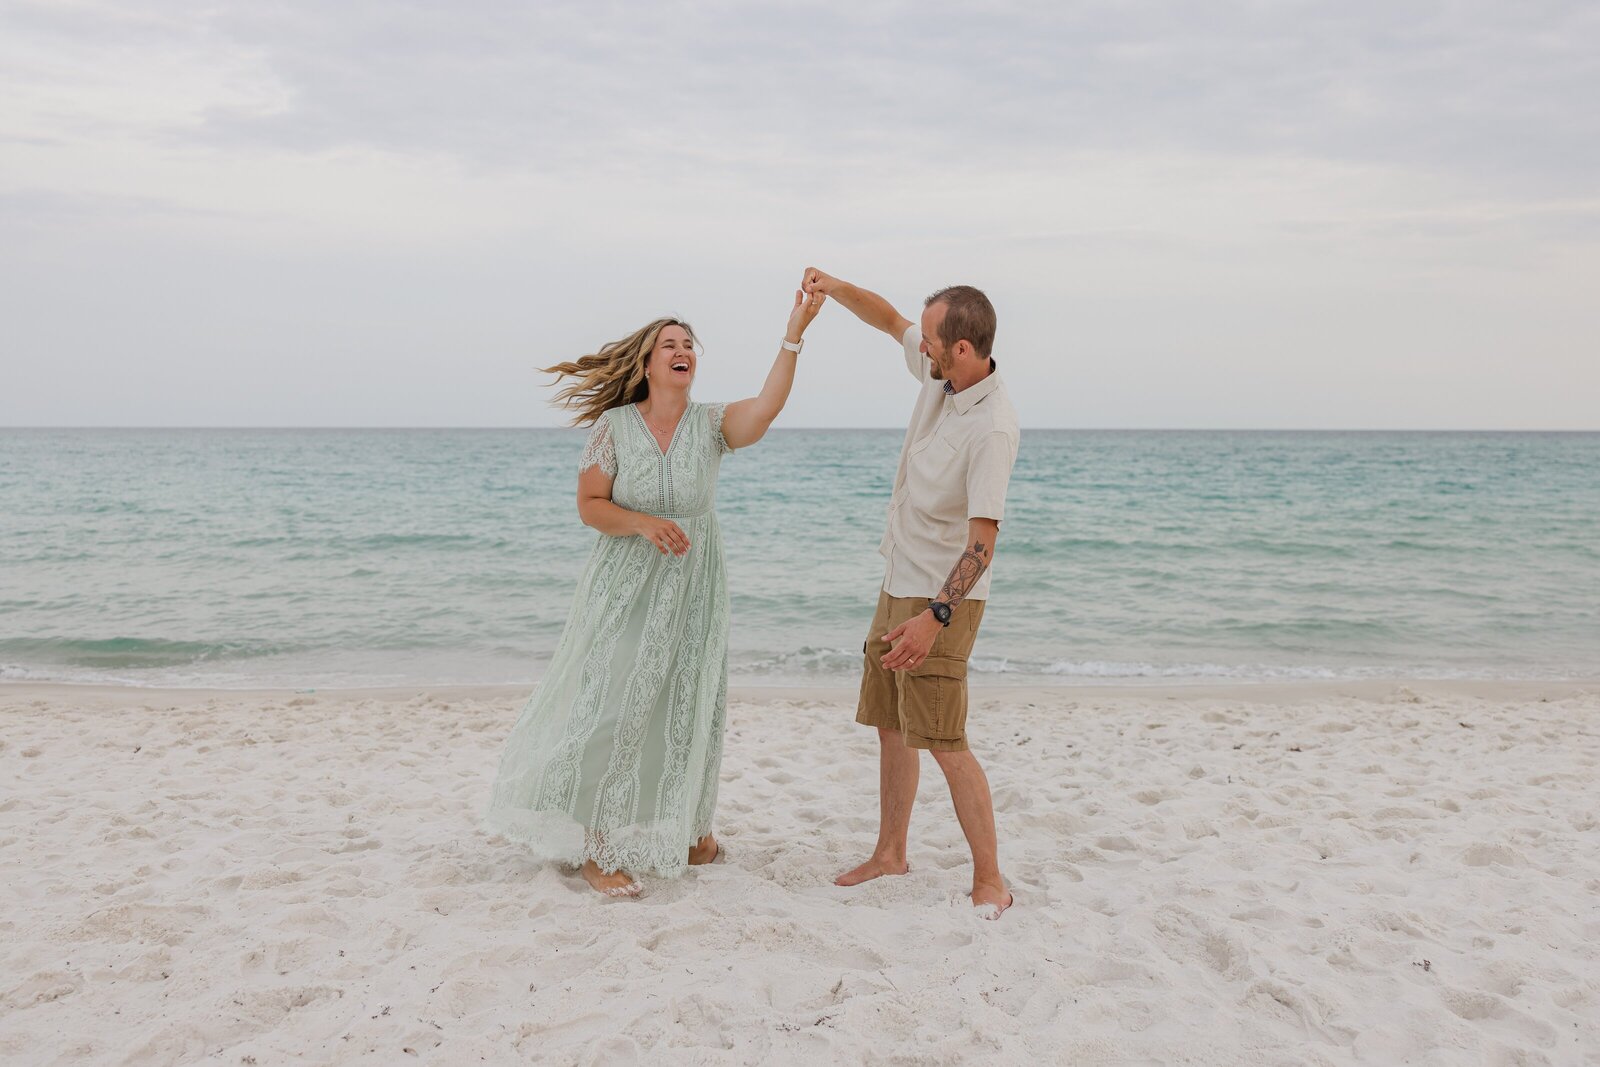 Mom and dad dance and laugh during beach photo session near Fort Pickens, Gulf Islands National Seashore